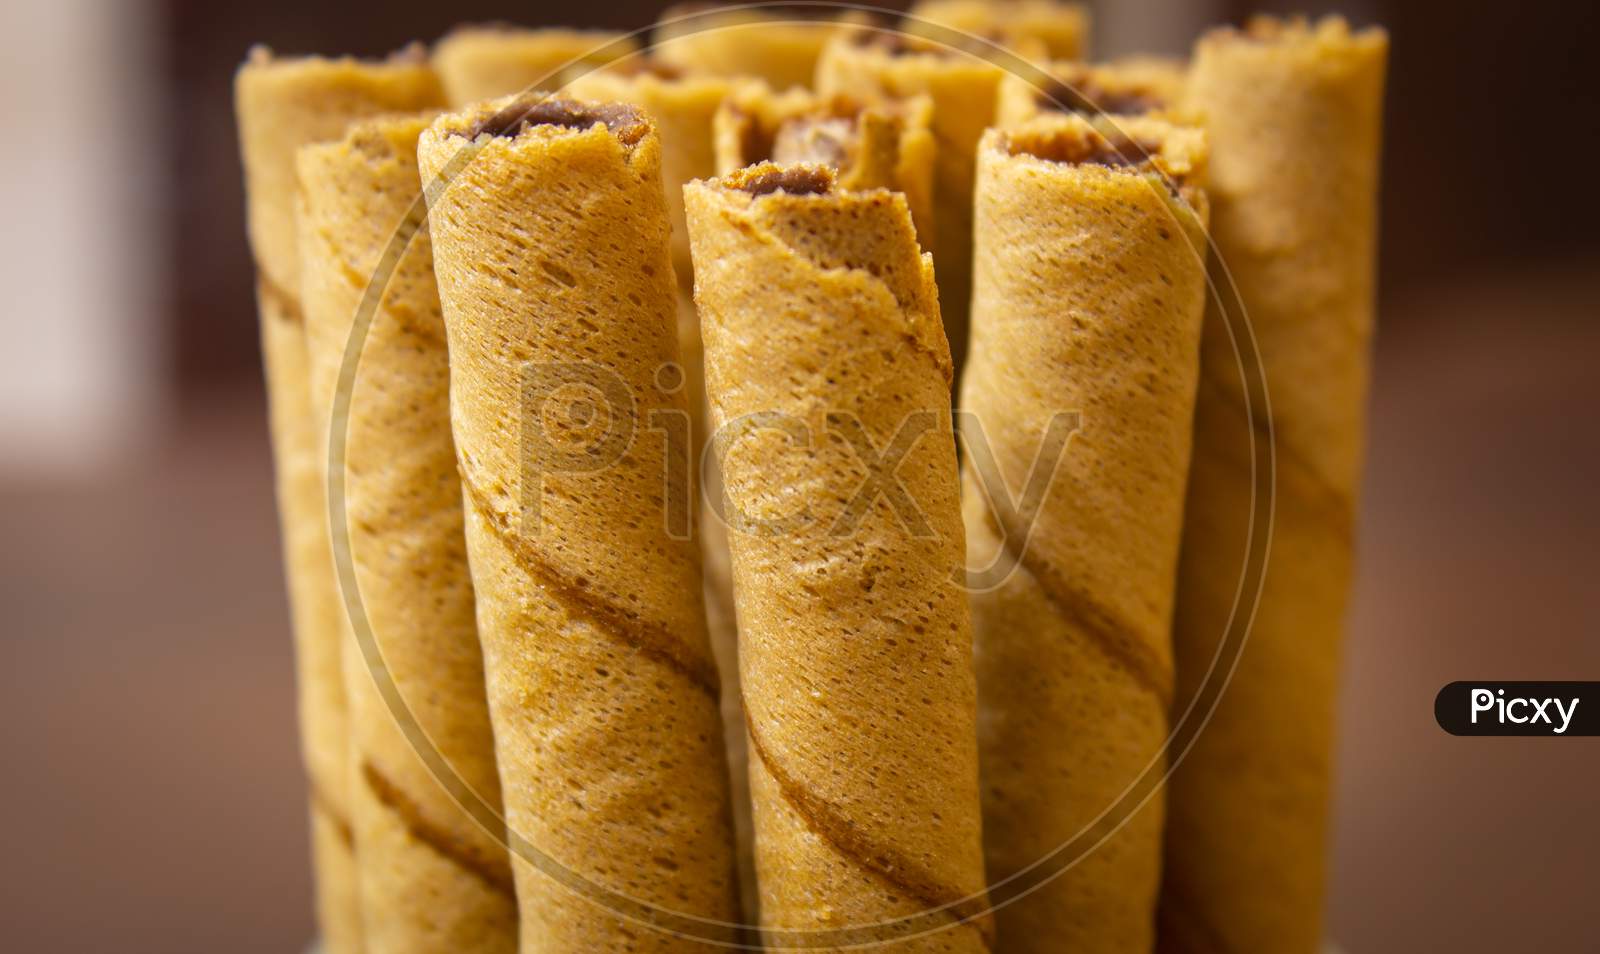 Bunch Of Chocolate Flavored Wafer Rolls. Crunchy Wafer Rolls Loved By Kids.